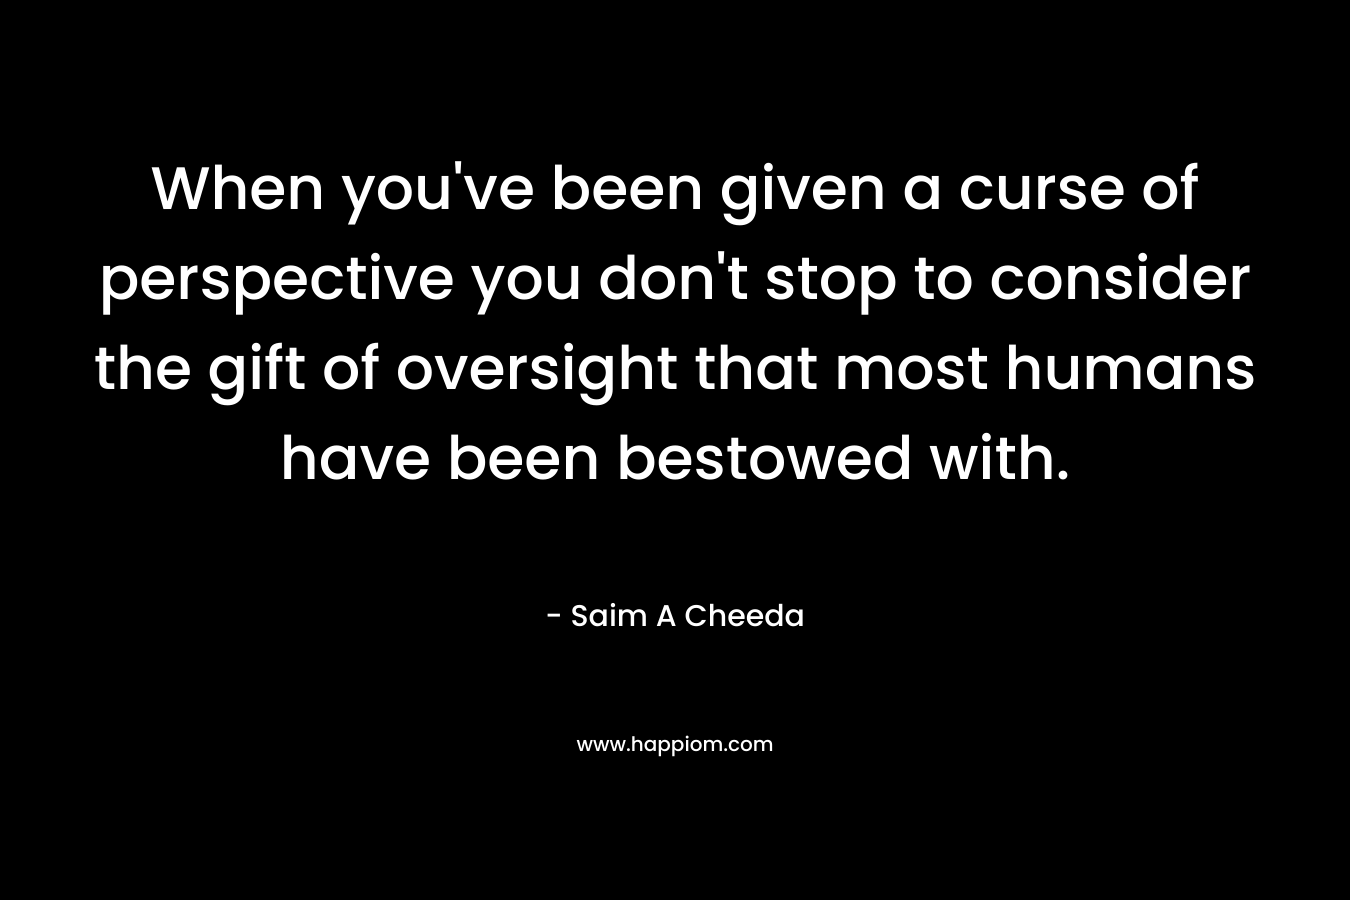 When you’ve been given a curse of perspective you don’t stop to consider the gift of oversight that most humans have been bestowed with. – Saim A Cheeda